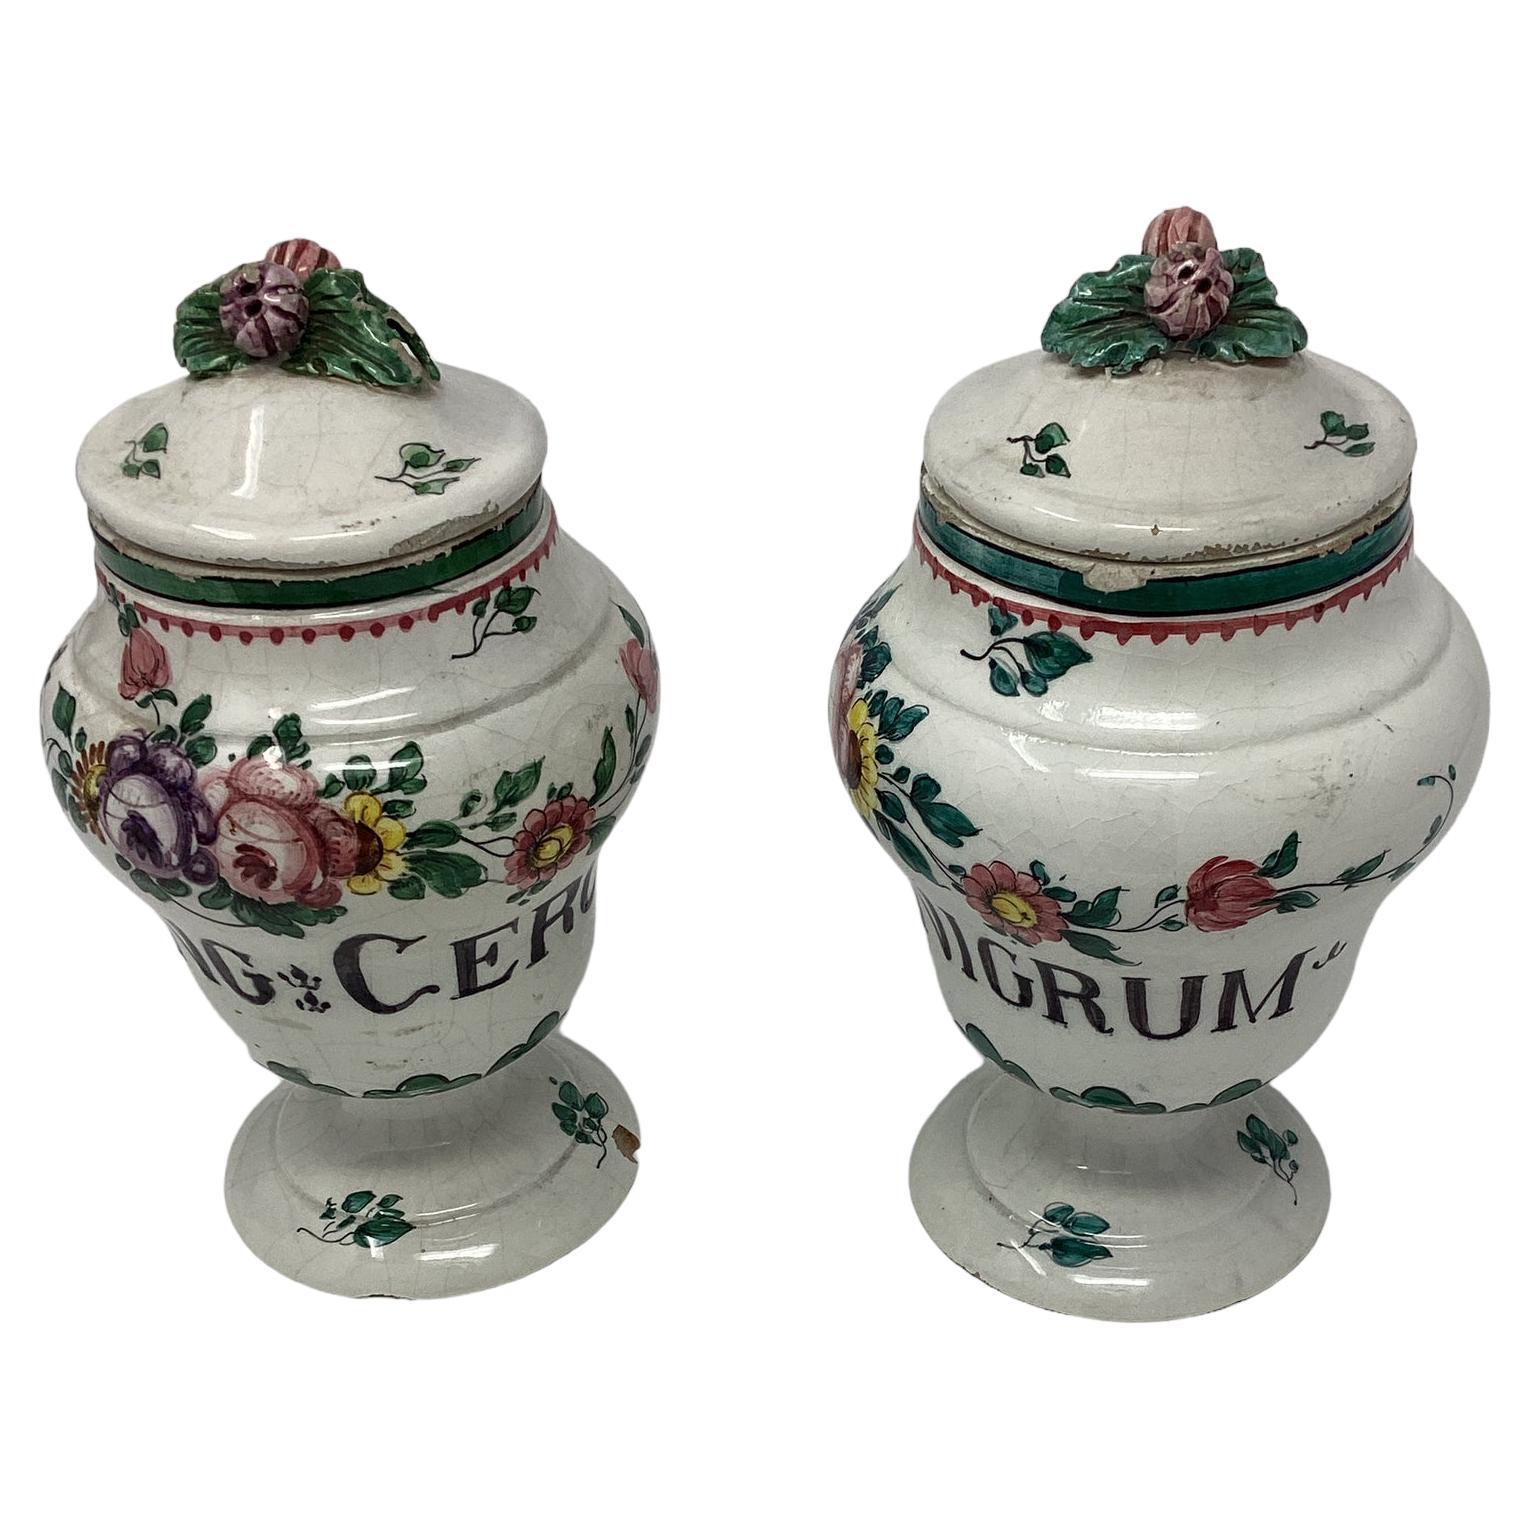 19th Century Italian Faience Floral Decorated Apothecary Jars For Sale